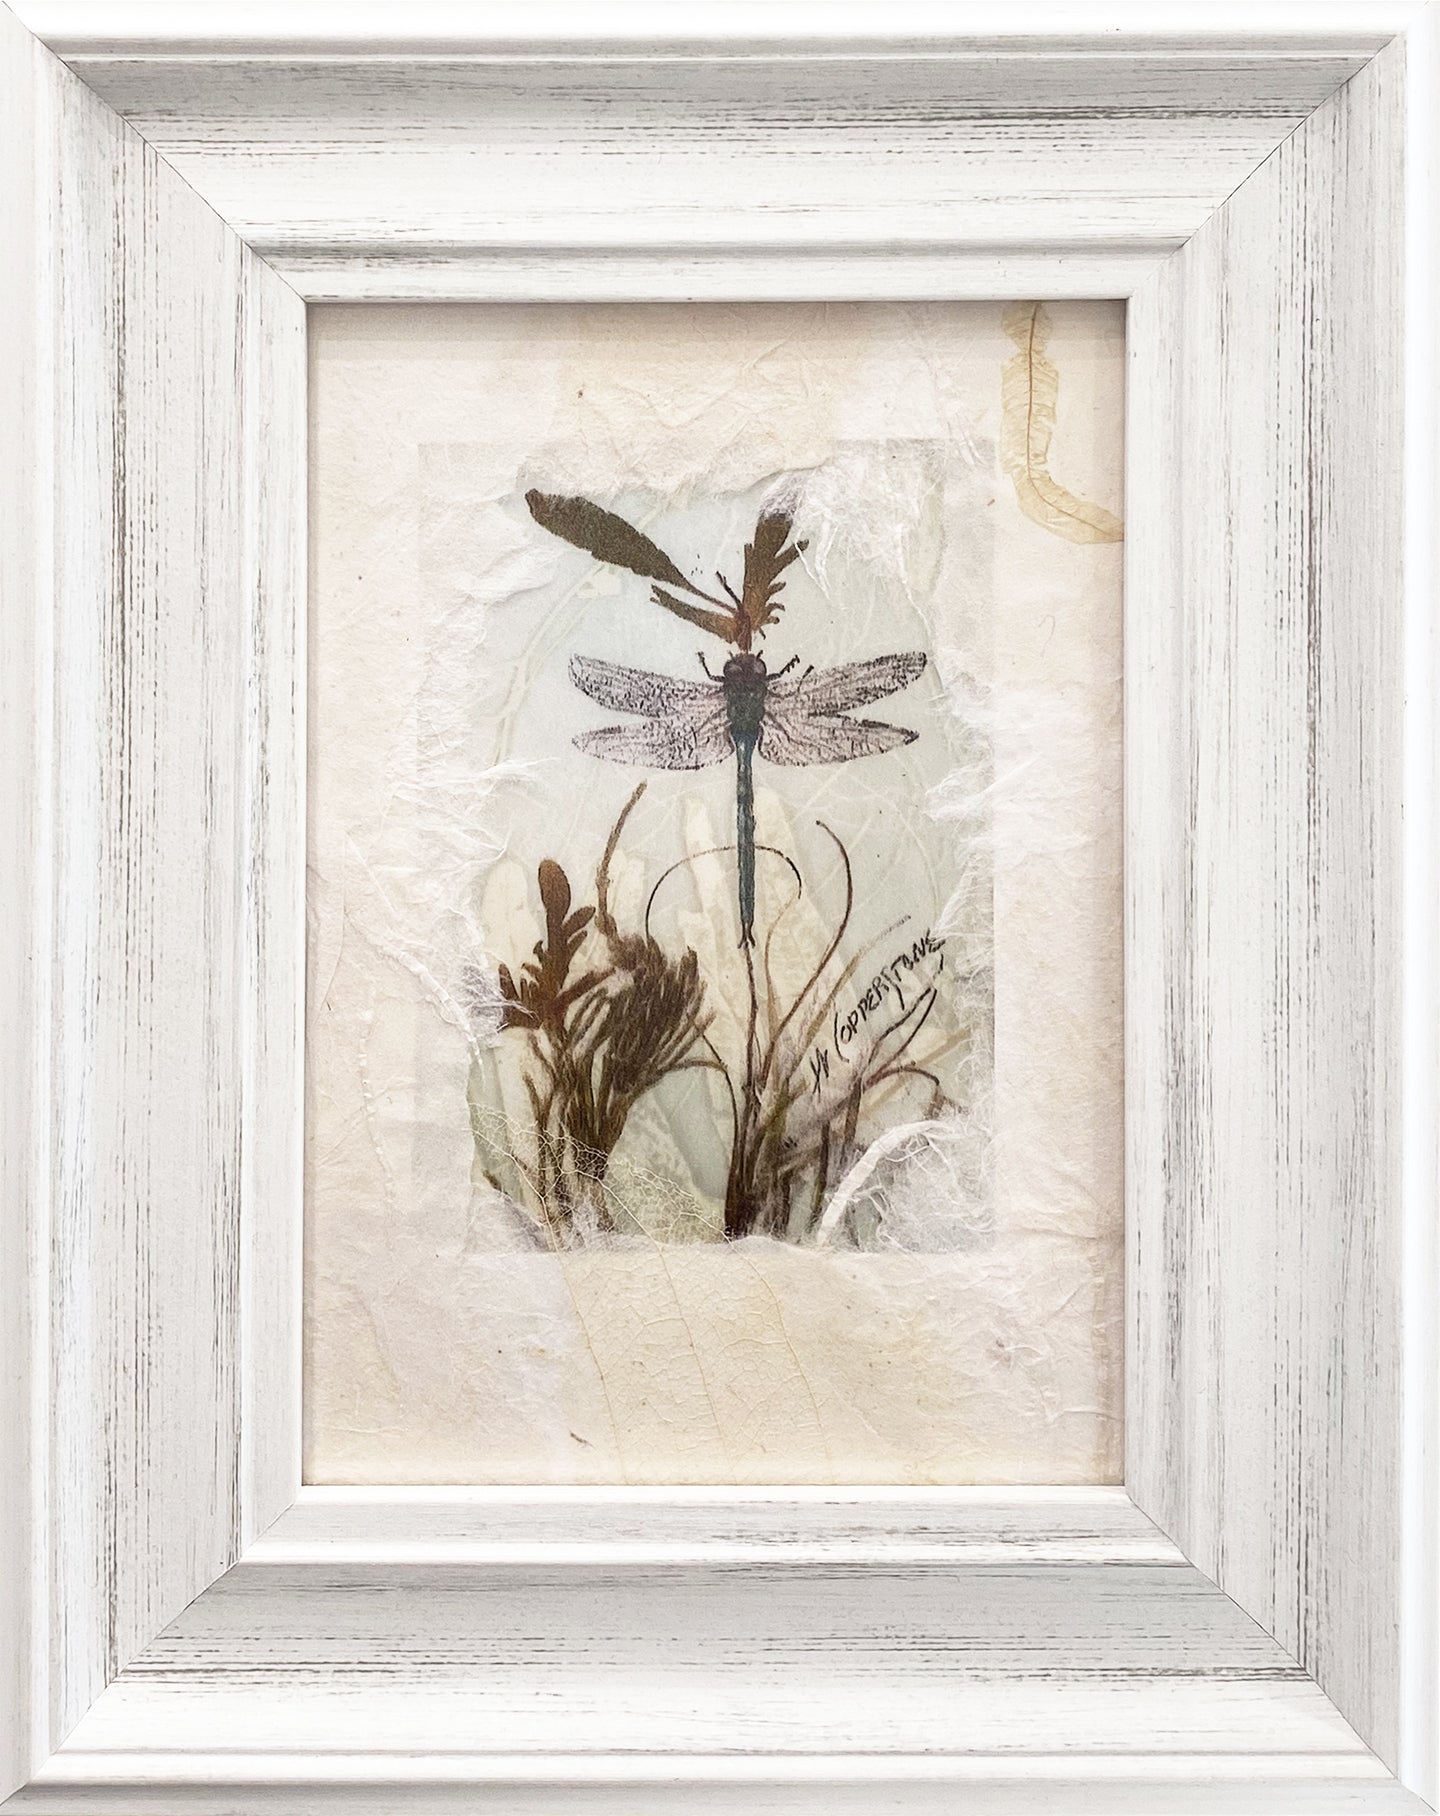 Framed dragonfly print by Janice A. Copperstone